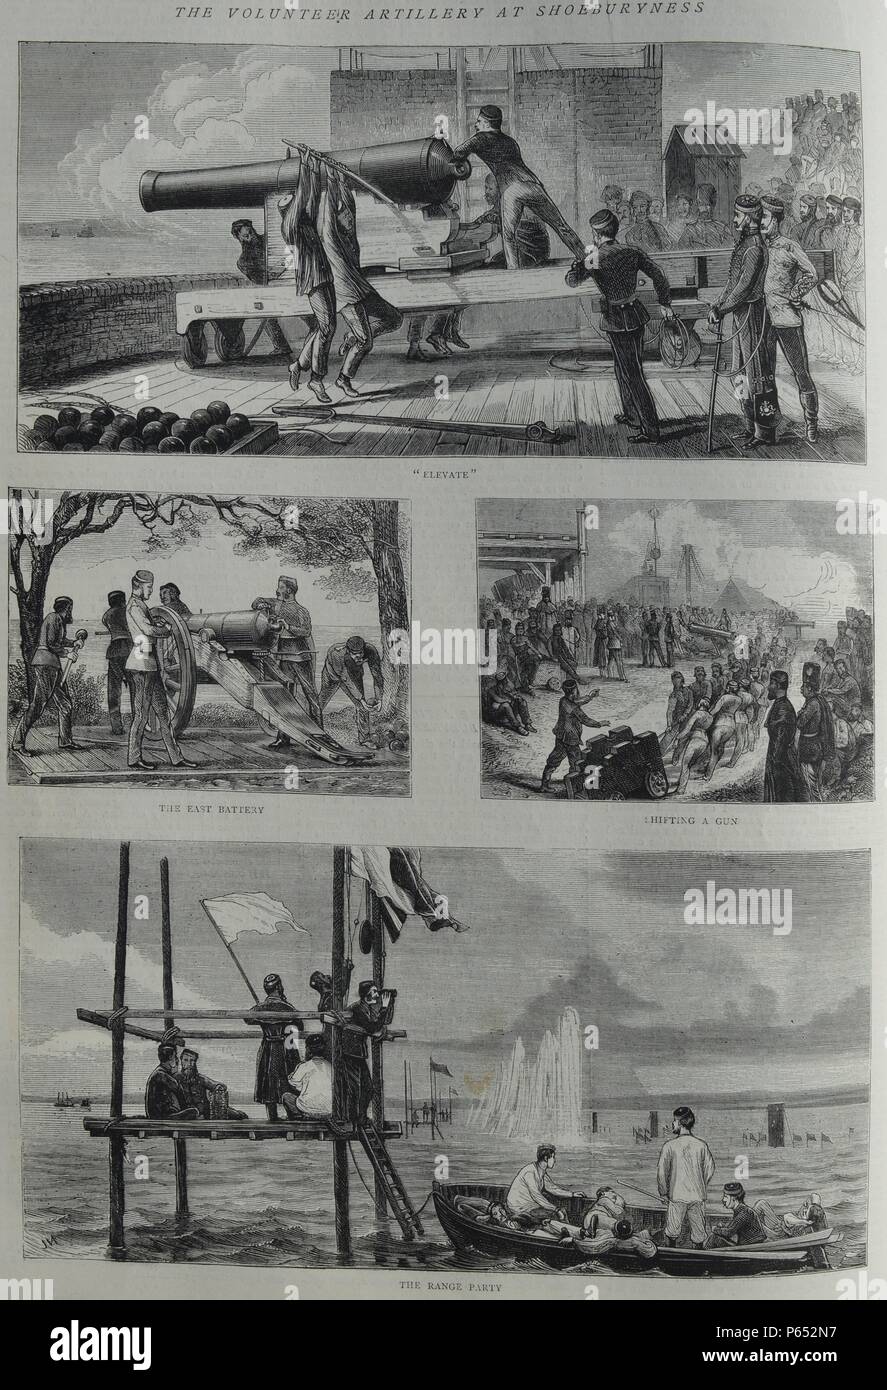 Engravings include: The Volunteer Artillery at Shoeburyness, Shifting a Gun, The East Battery, The Range Party. Dated 1870 Stock Photo